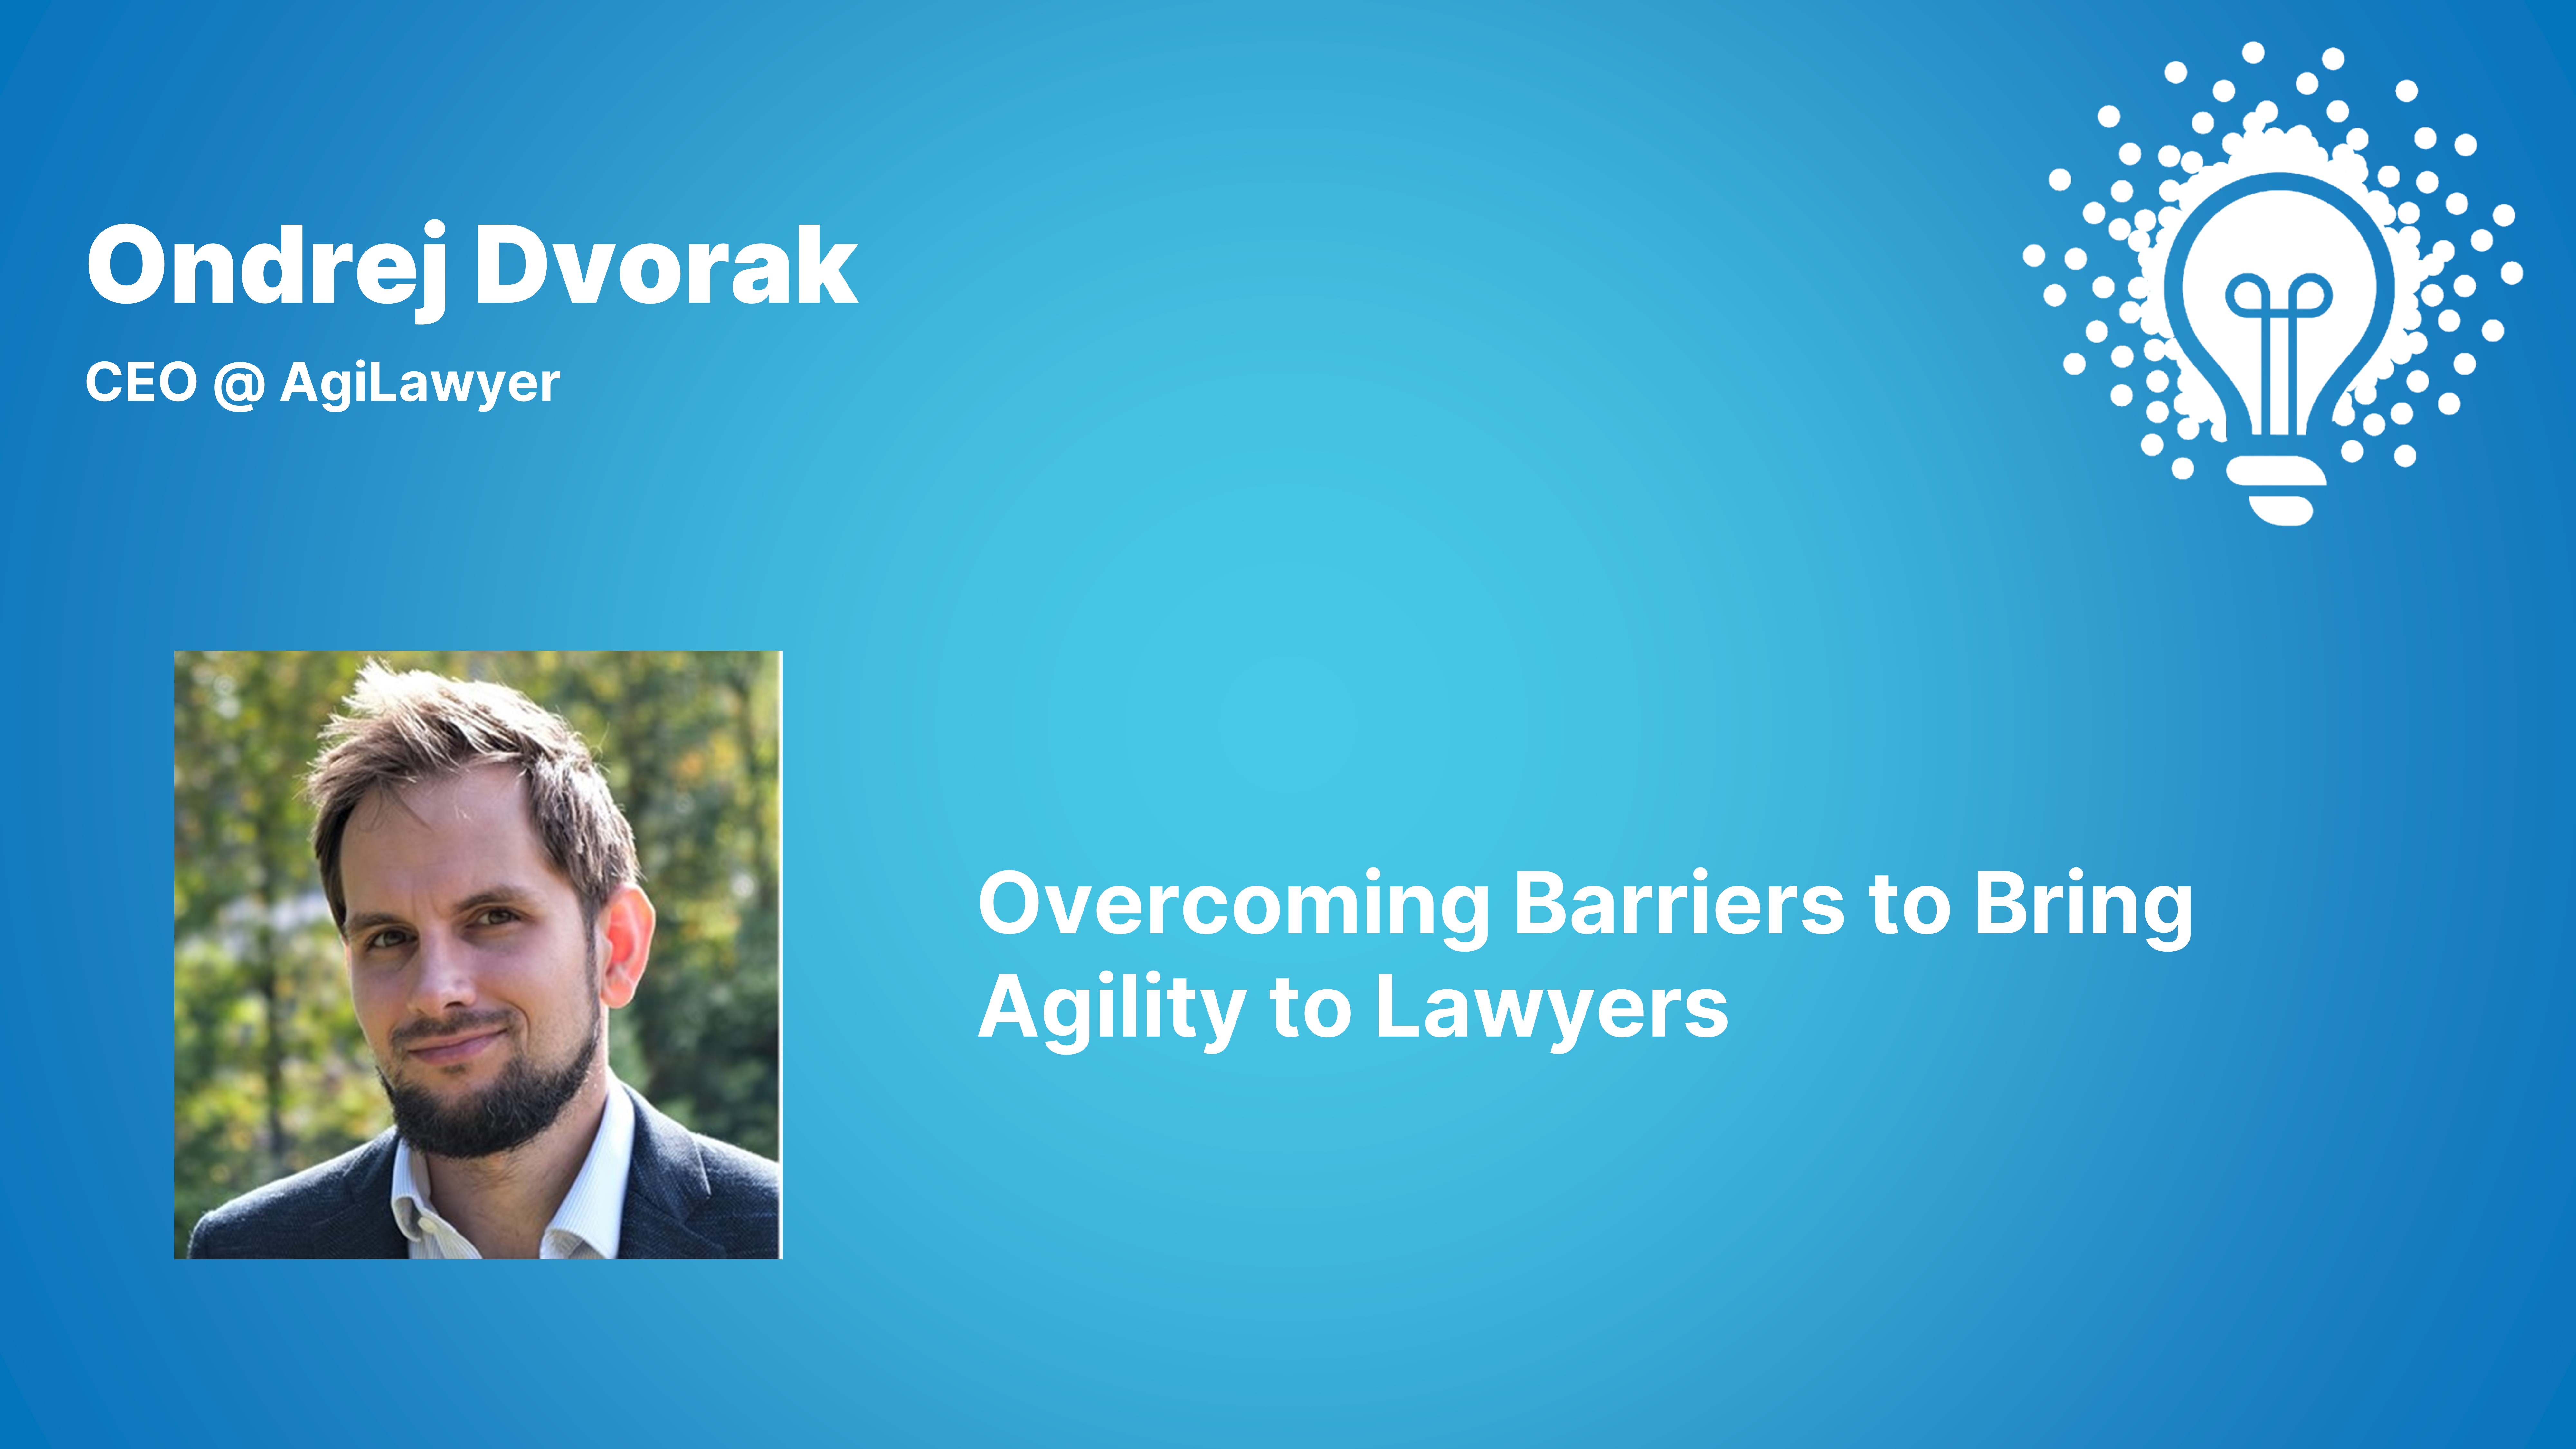 Overcoming Barriers to Bring Agility to Lawyers